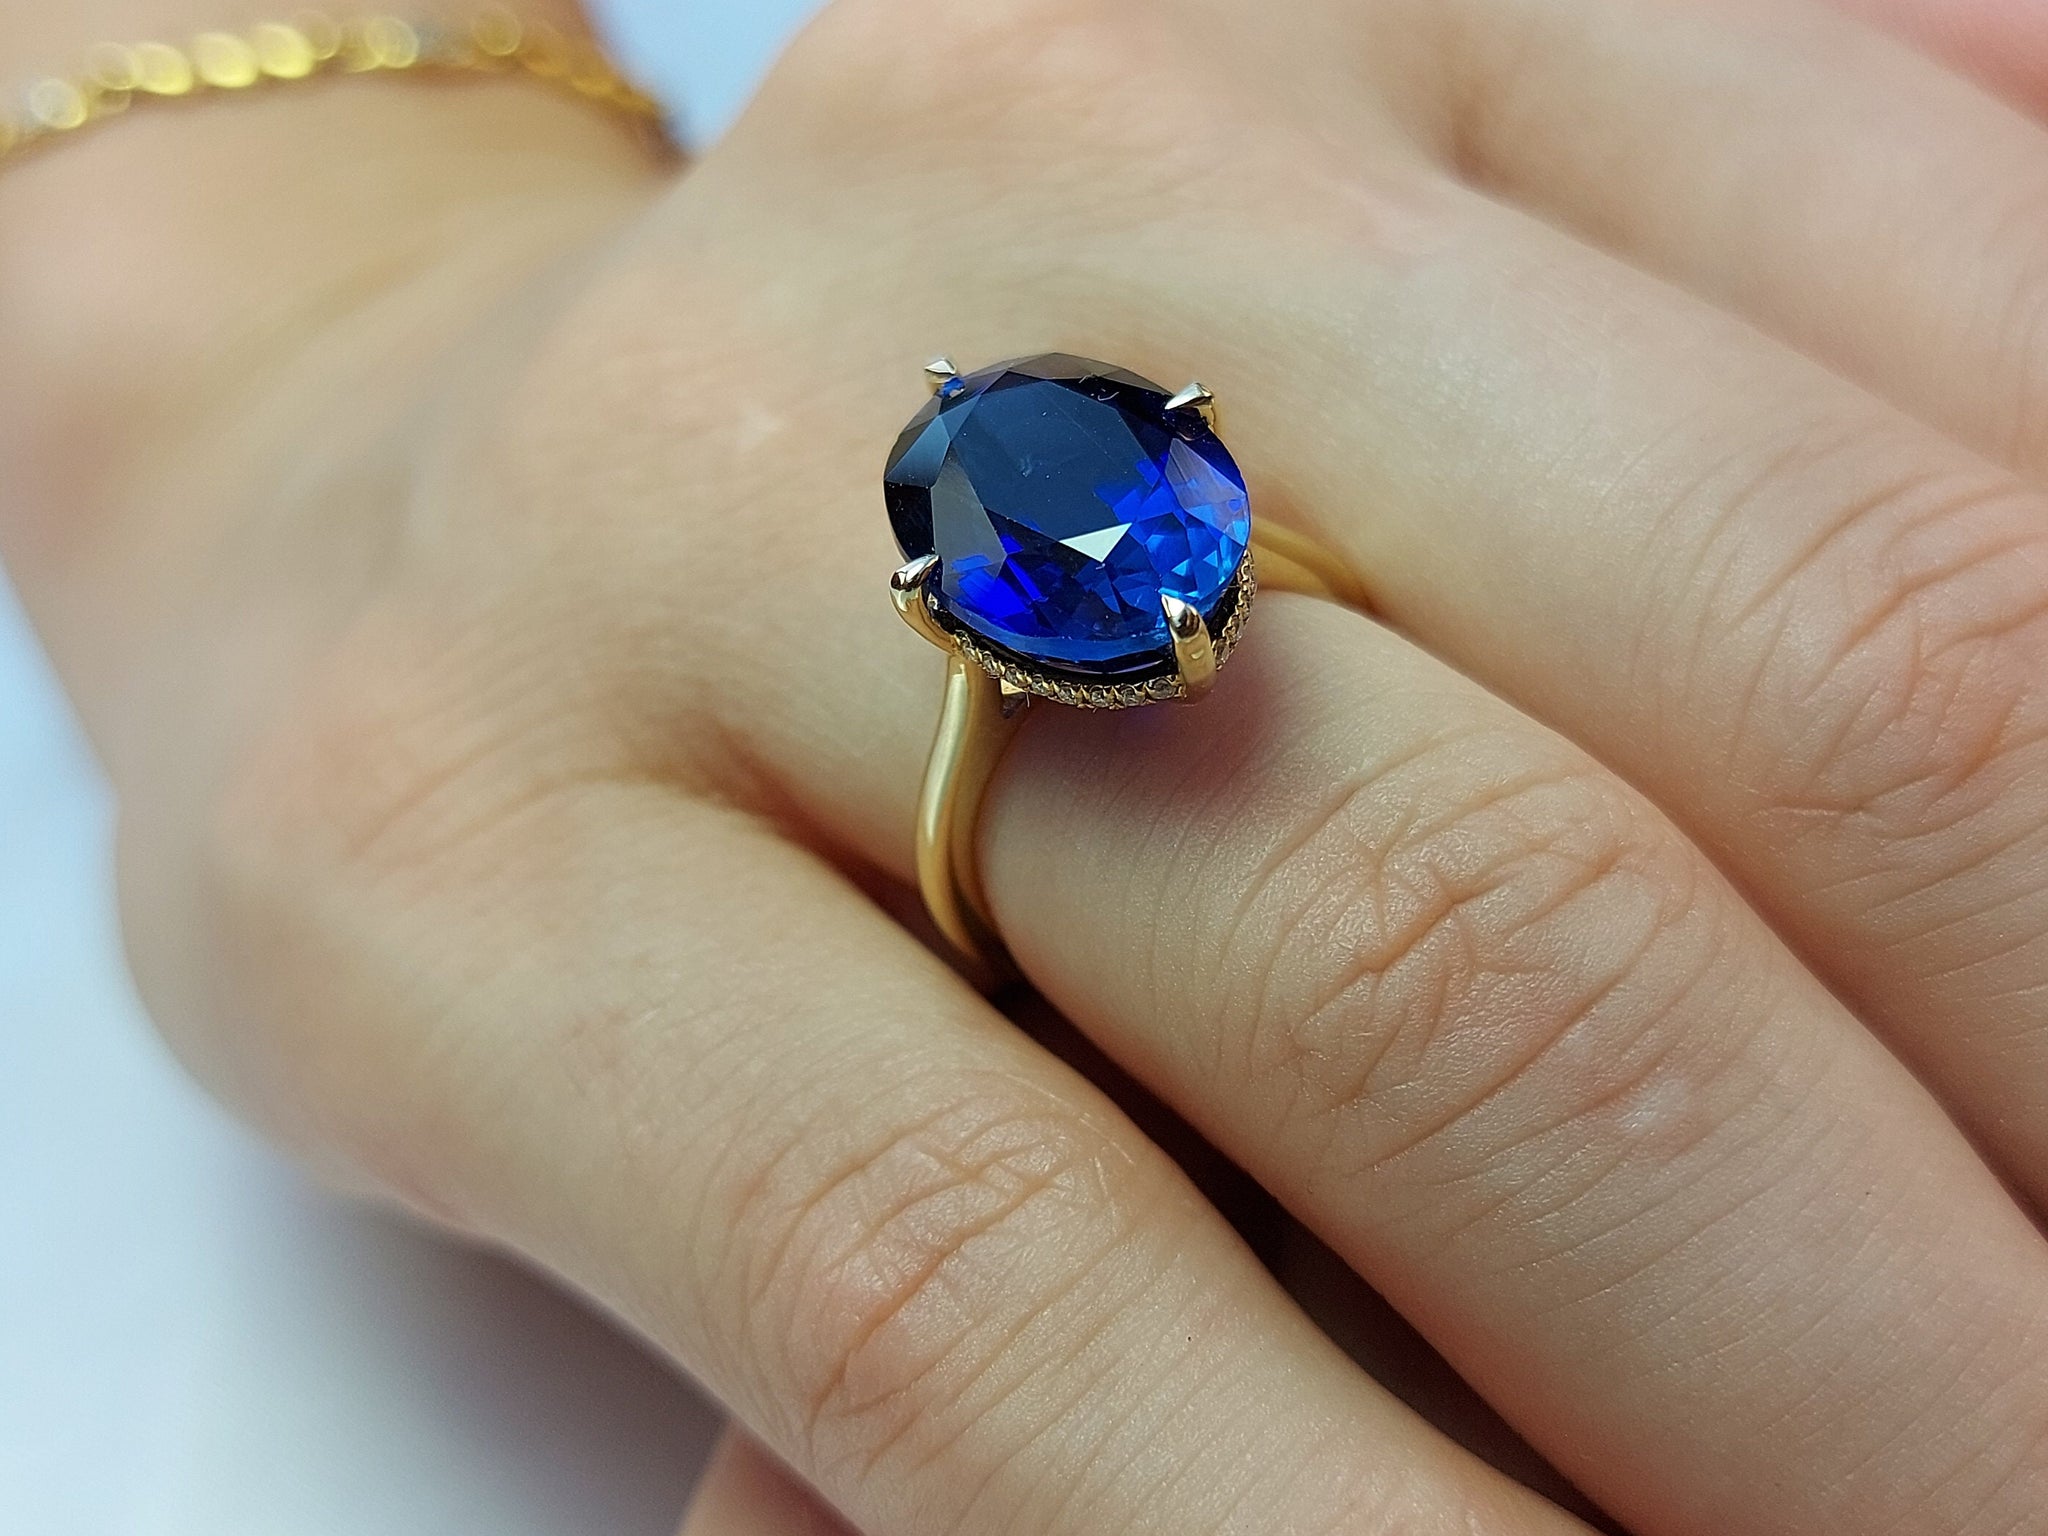 Unique Genuine Blue sapphire Oval Cut Engagement Ring 13*9mm blue sapphire engagement ring diamond hidden halo ring Proposal Ring.